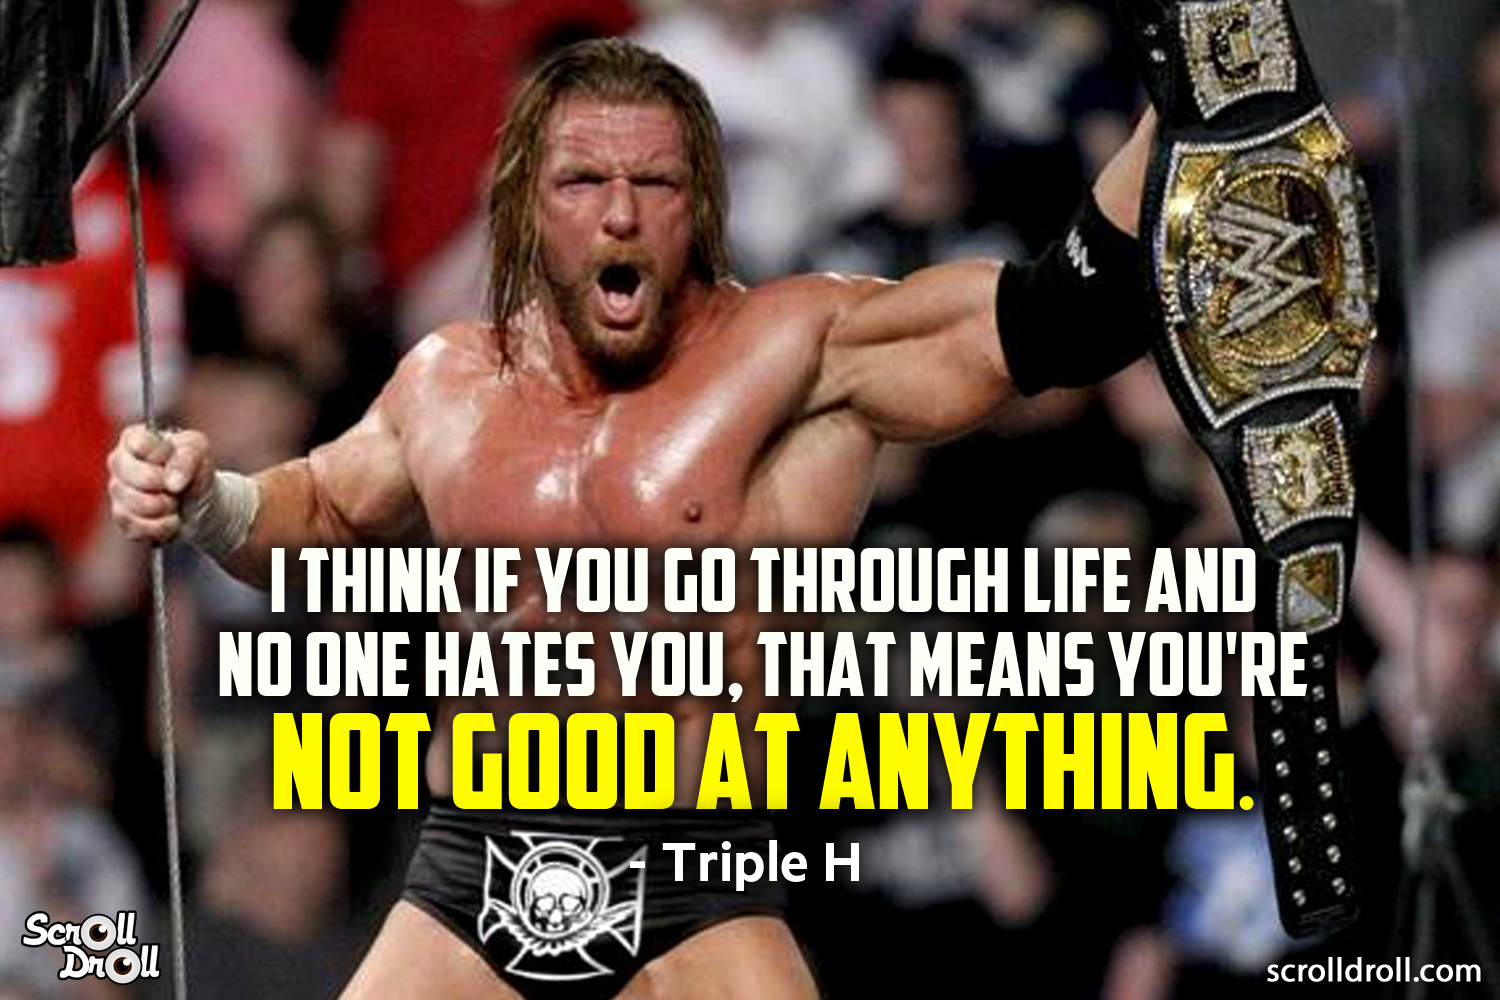 13 Inspiring Quotes by WWE Wrestlers